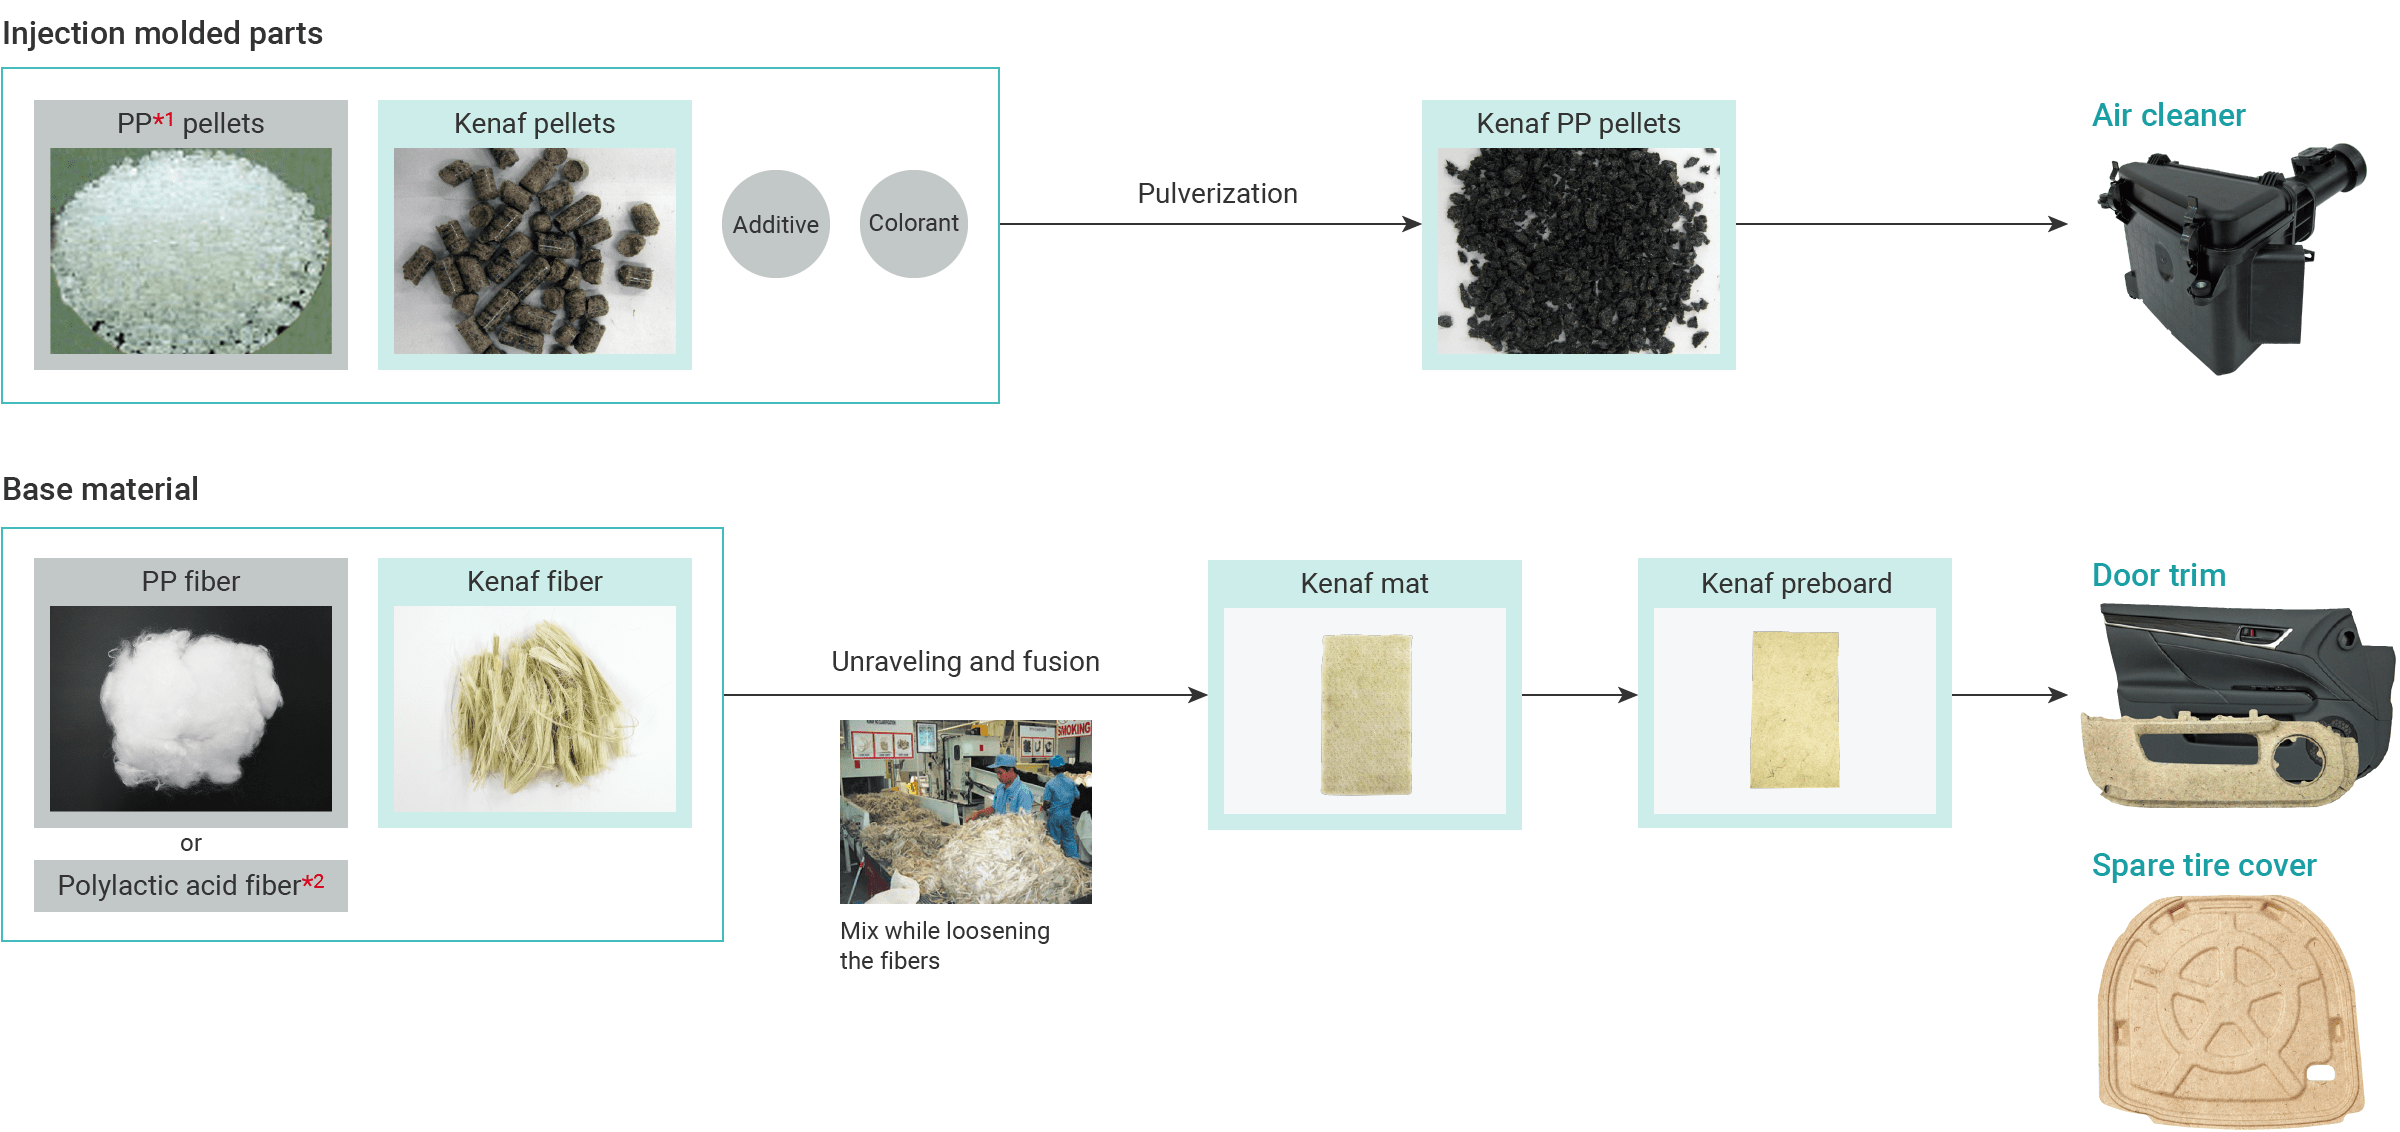 Figure:How kenaf products are made